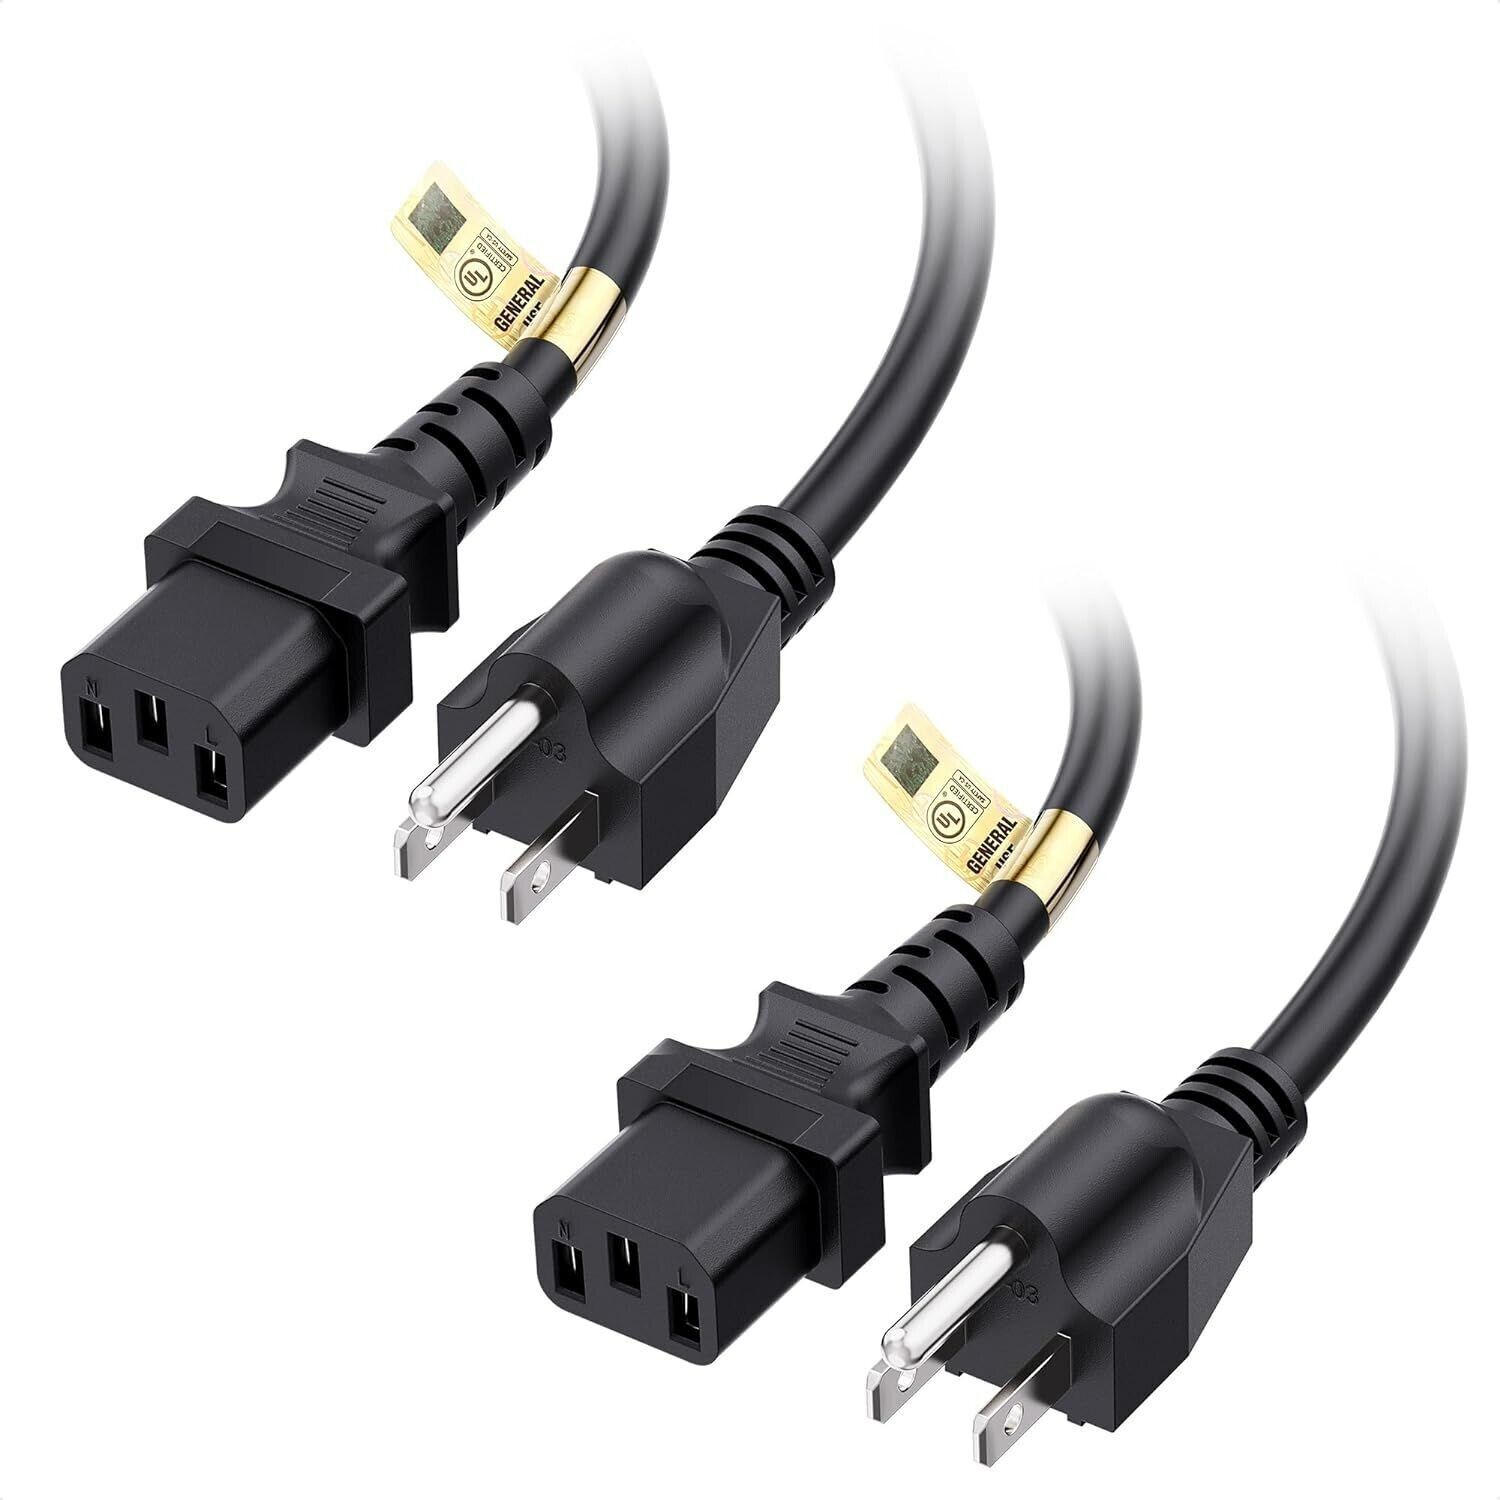 Primary image for Cable Matters 2-Pack UL Listed 3 Prong TV Power Cord 6 ft, Computer Power Cord